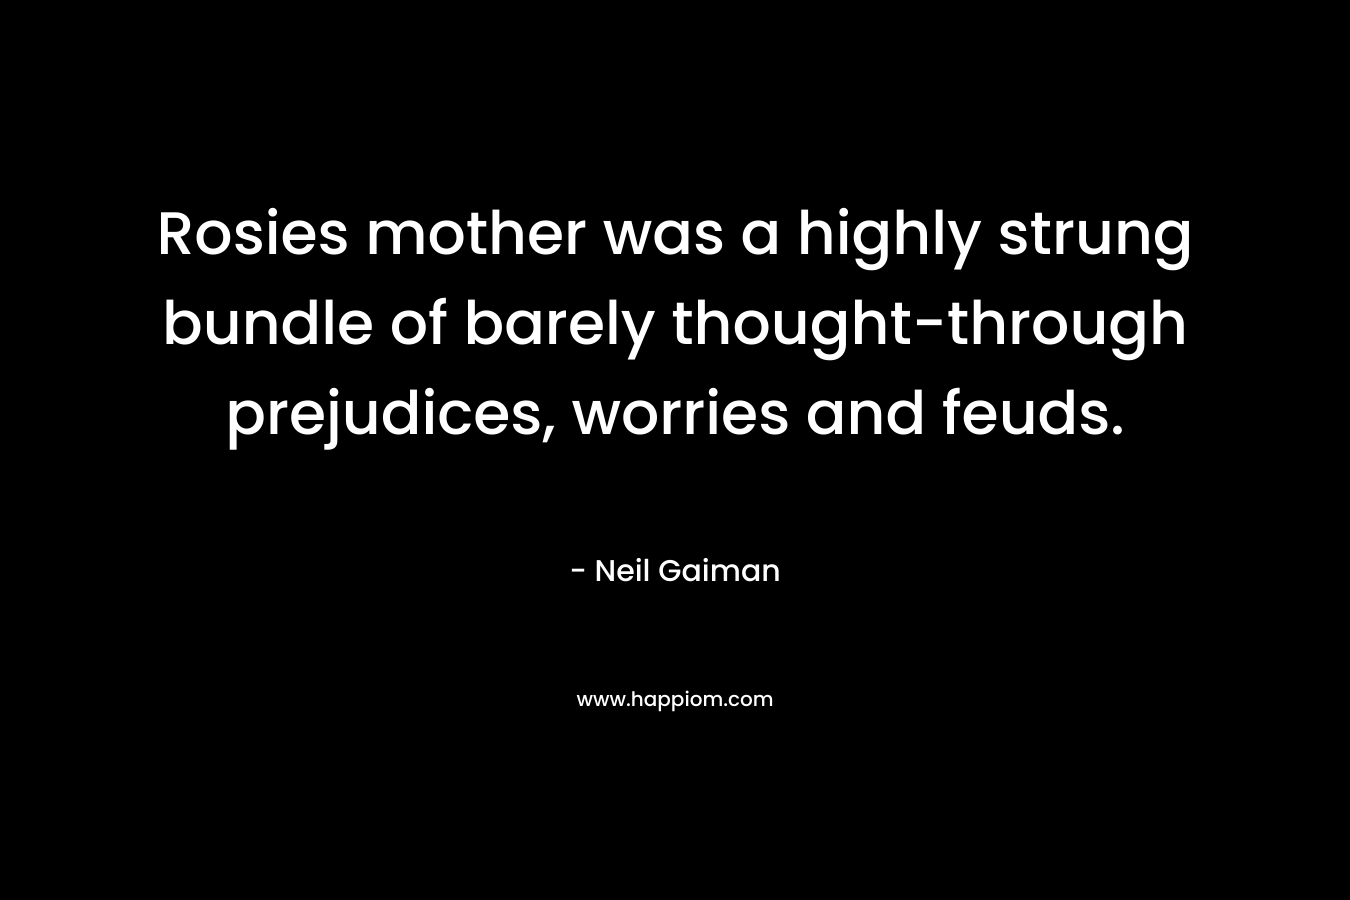 Rosies mother was a highly strung bundle of barely thought-through prejudices, worries and feuds. – Neil Gaiman